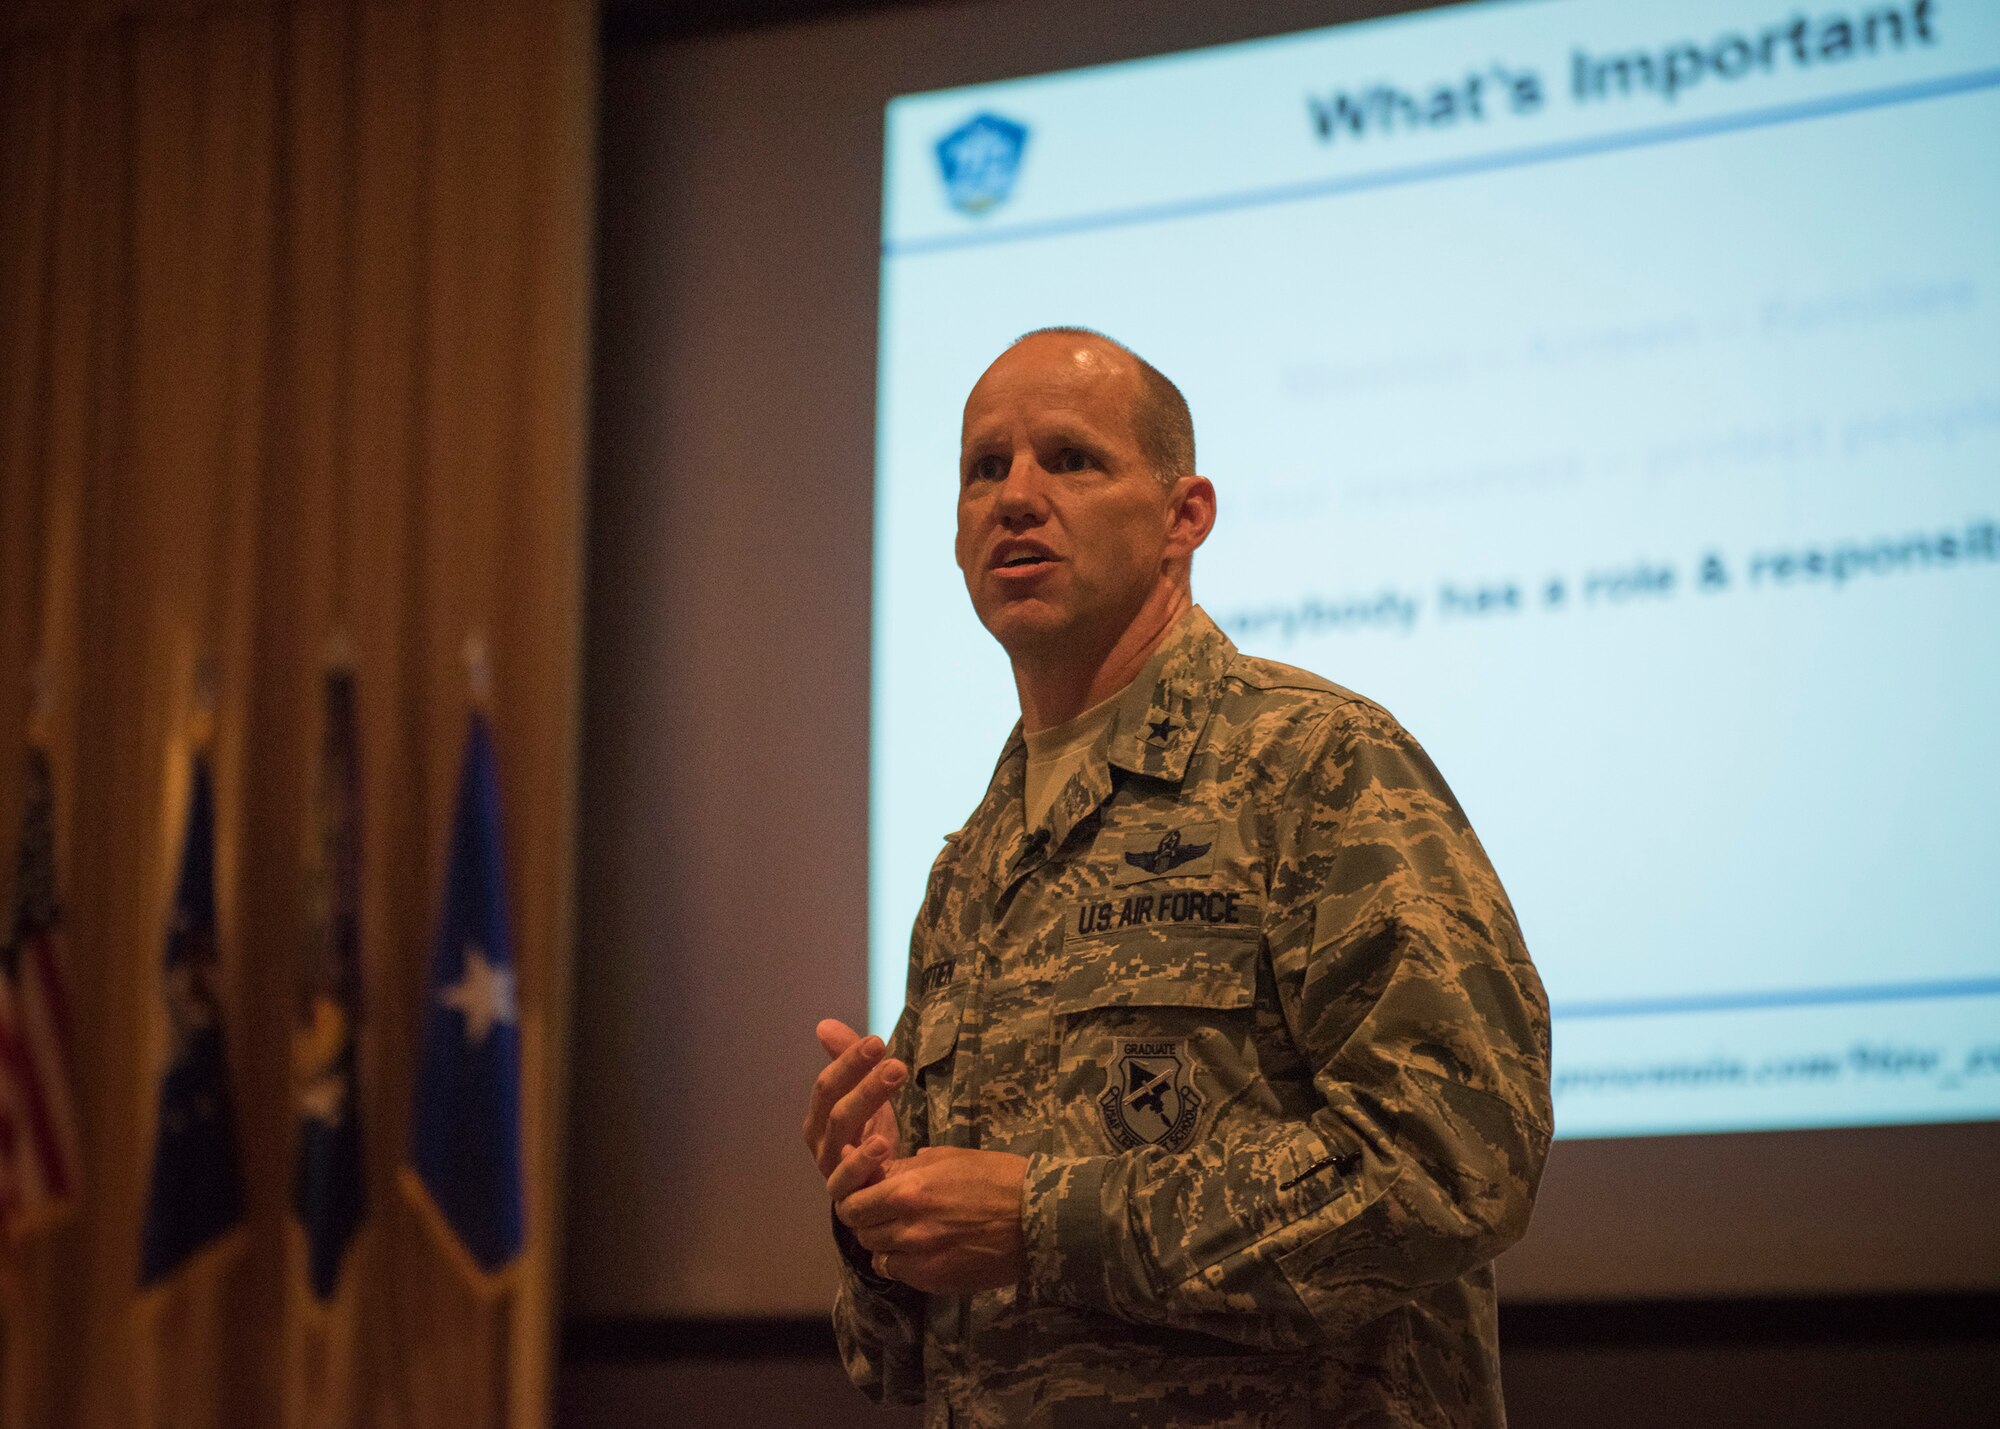 Brig. Gen. Evan Dertien, 96th Test Wing commander, speaks to Airmen during his first commander’s call at Eglin Air Force Base, Fla., July 20. Dertien stressed the importance of every Airman’s role in support of the wing’s test mission and in providing agile mission support to mission partners. He also talked about Eglin’s role in the nation’s defense. (U.S. Air Force photo/Ilka Cole) 